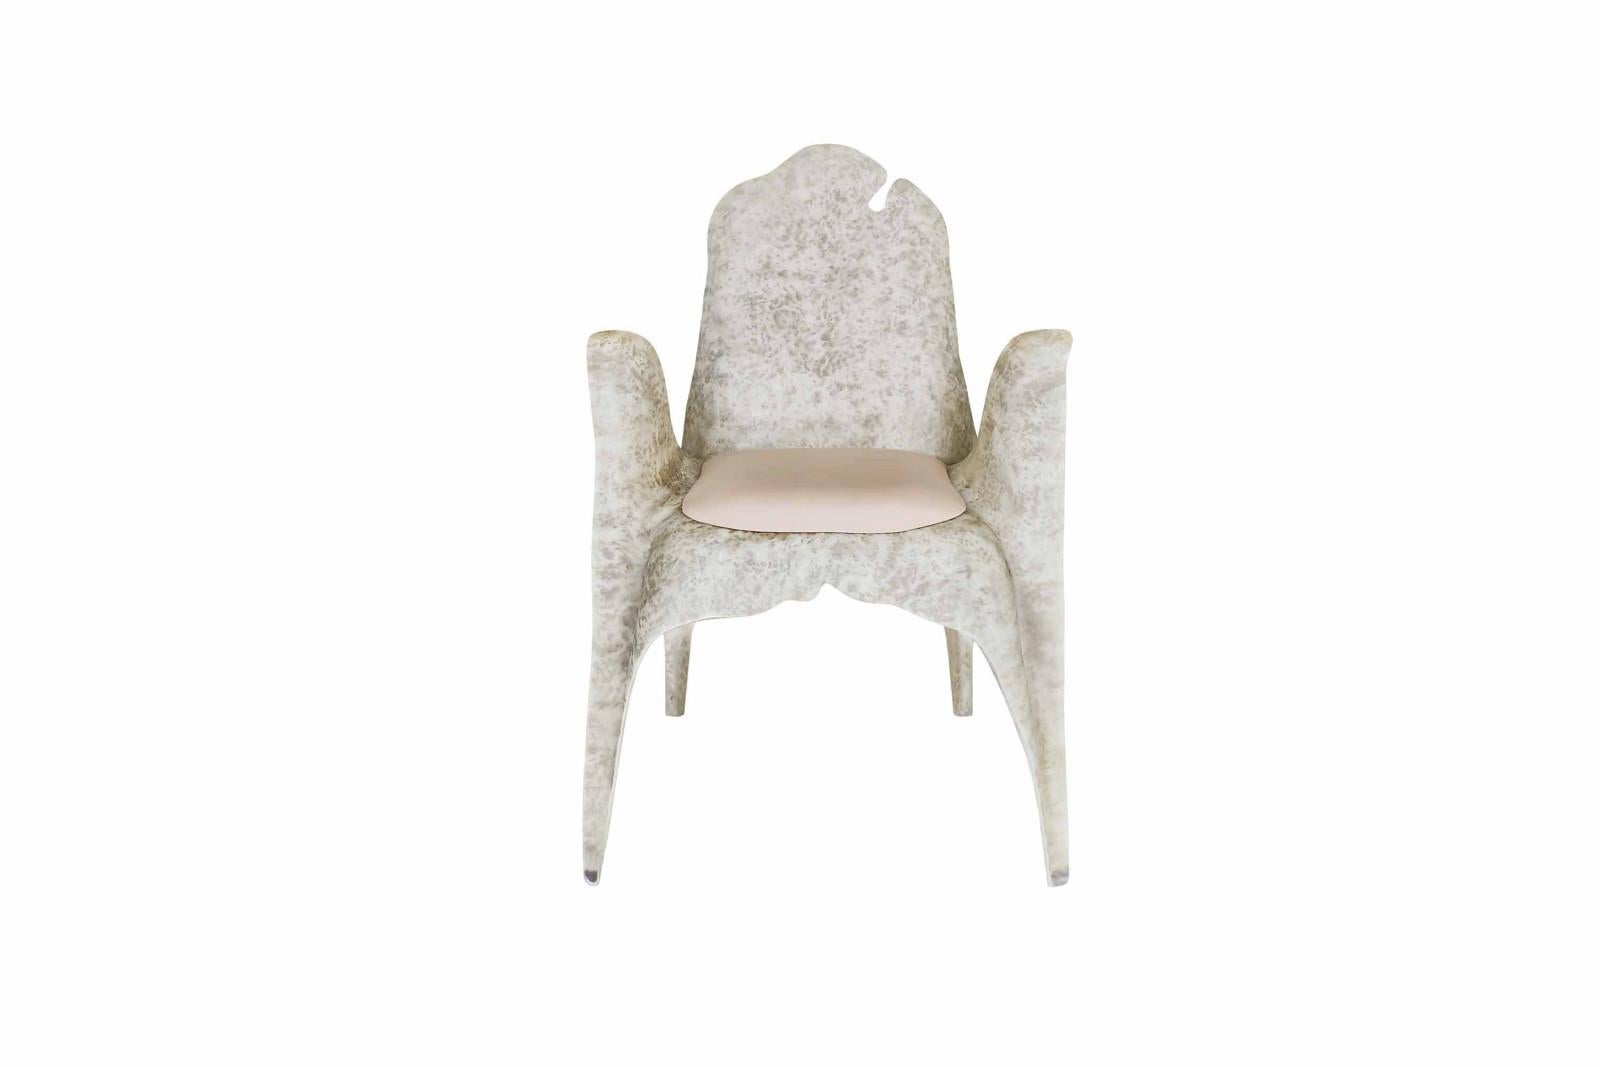 Contemporary dining chairs built with resin reinforced fiberglass. This highly resistant material is very durable and requires no maintenance. The chairs are then lacquered in matte white suitable for outdoor use. 
Chairs can also be lacquered in